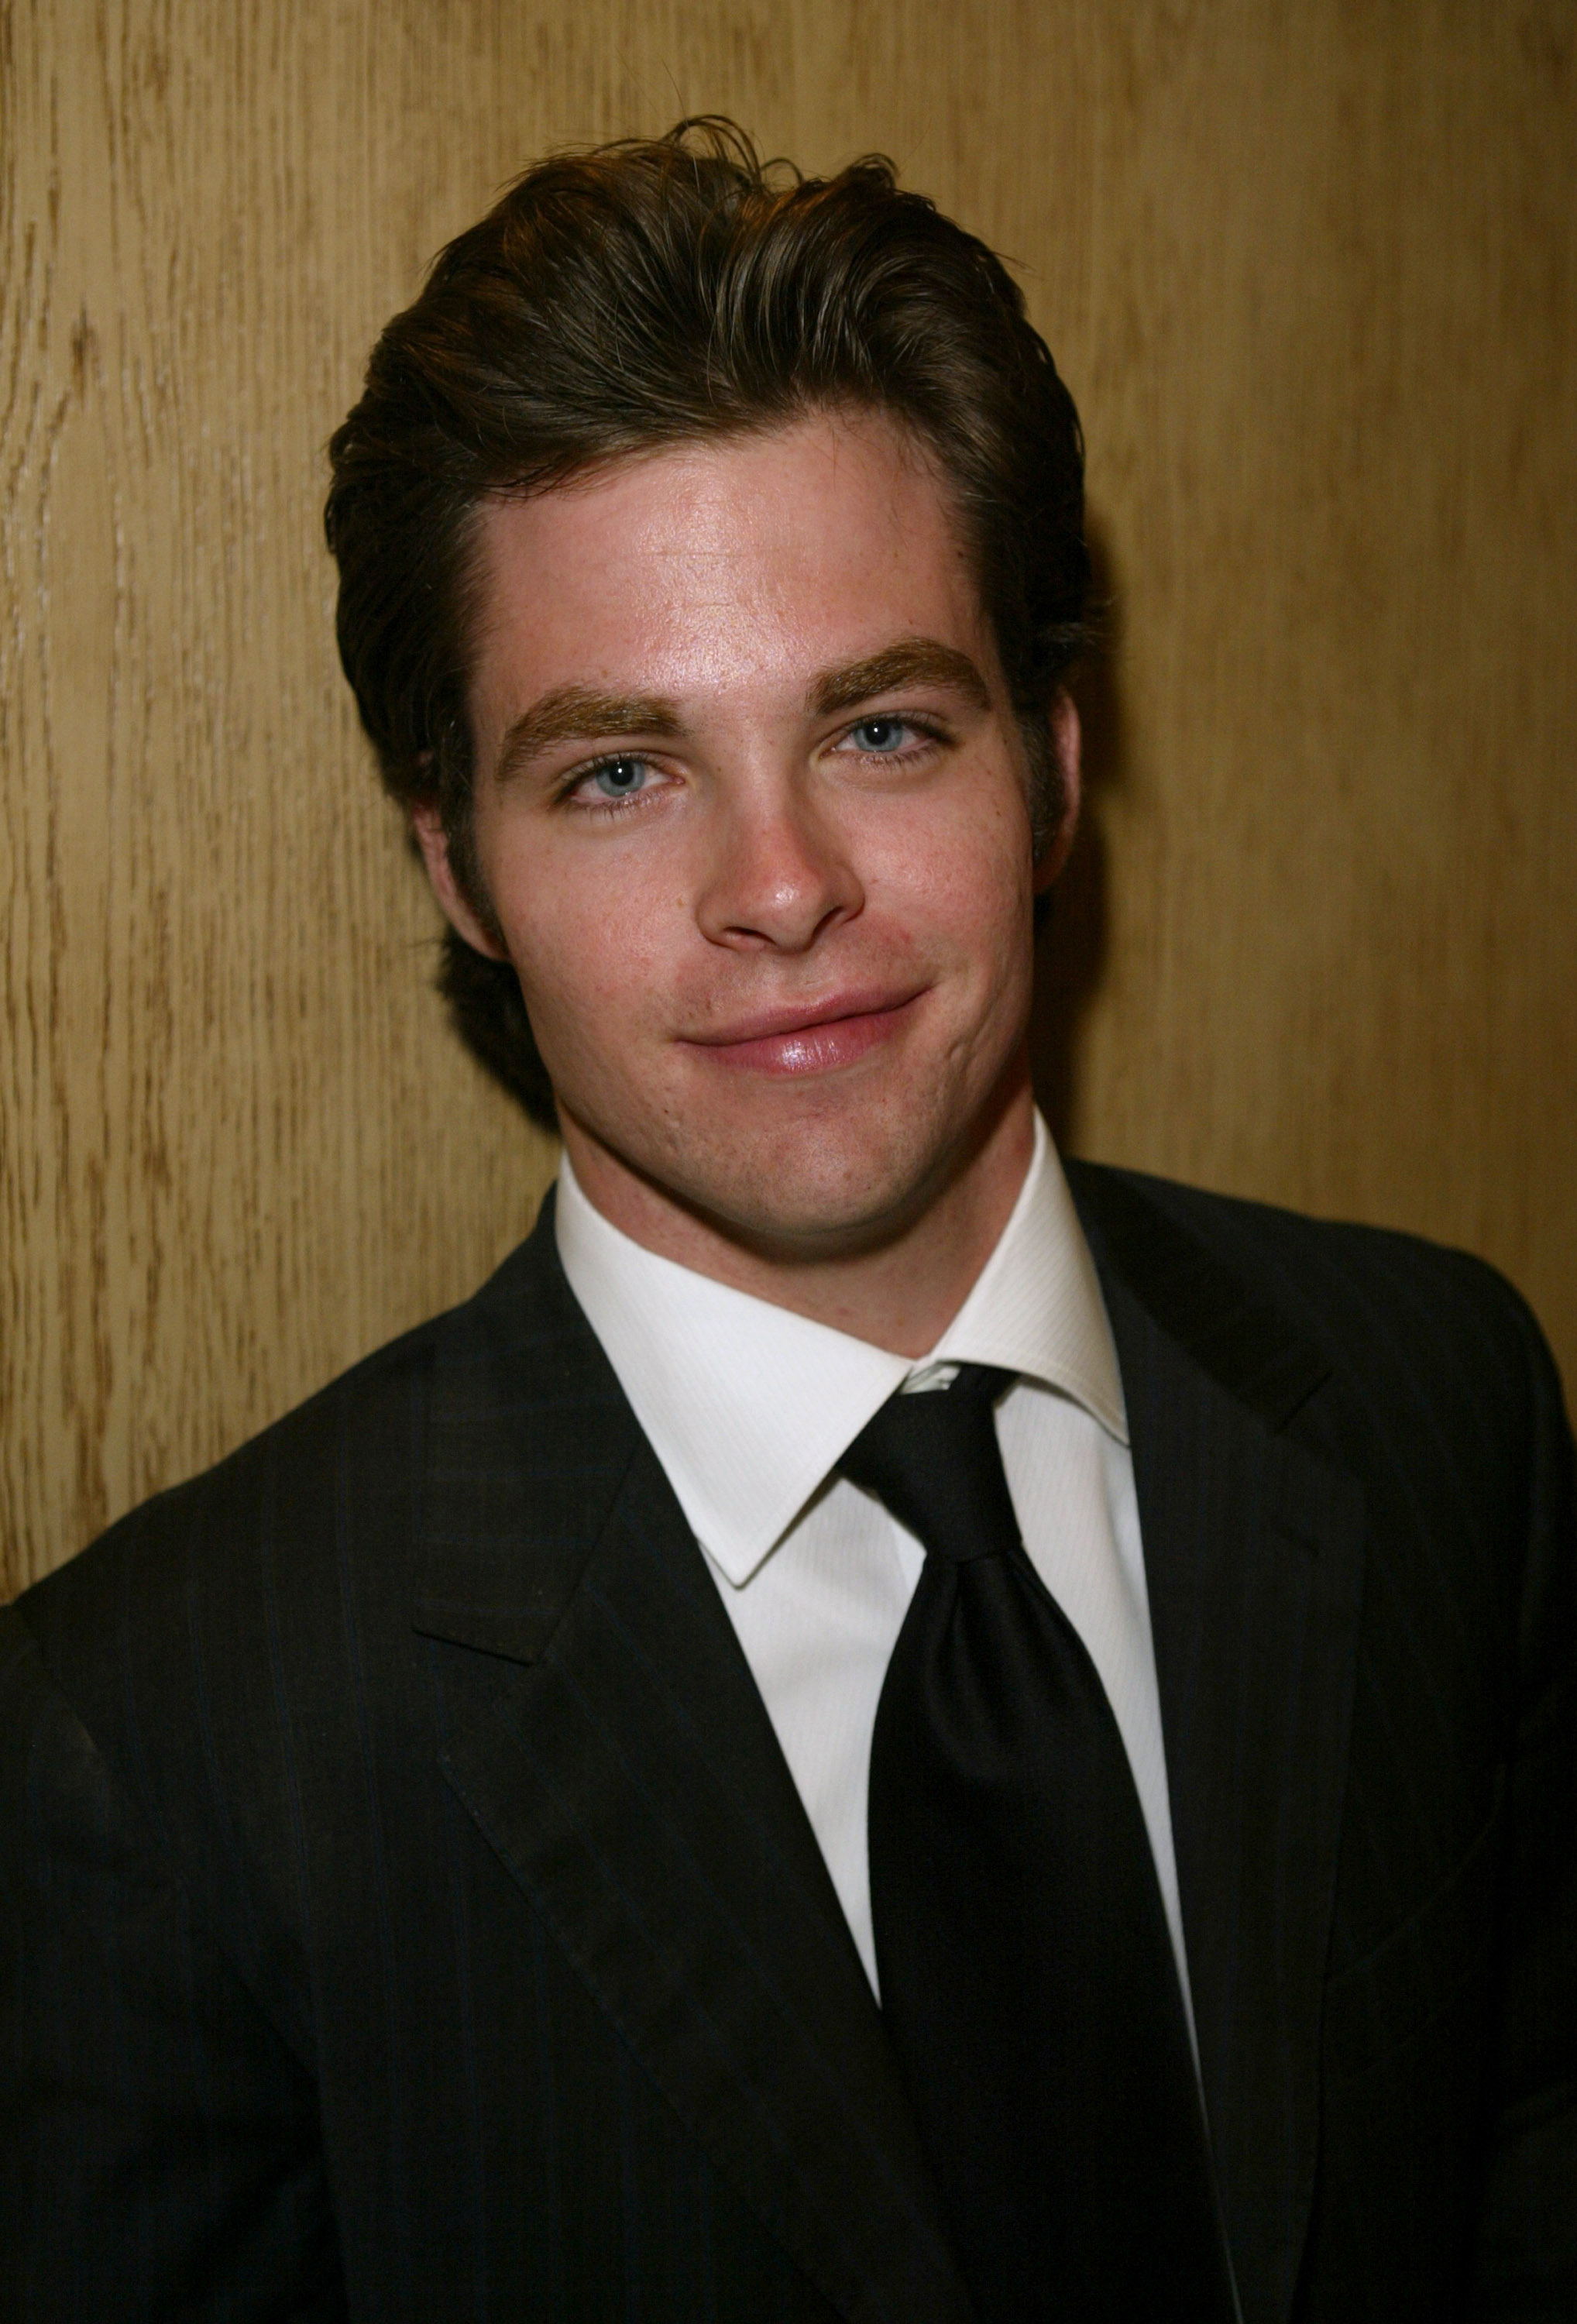 Chris Pine at the 54th Annual Ace Eddie Awards on February 15, 2004 in Beverly Hills, California. | Source: Getty Images